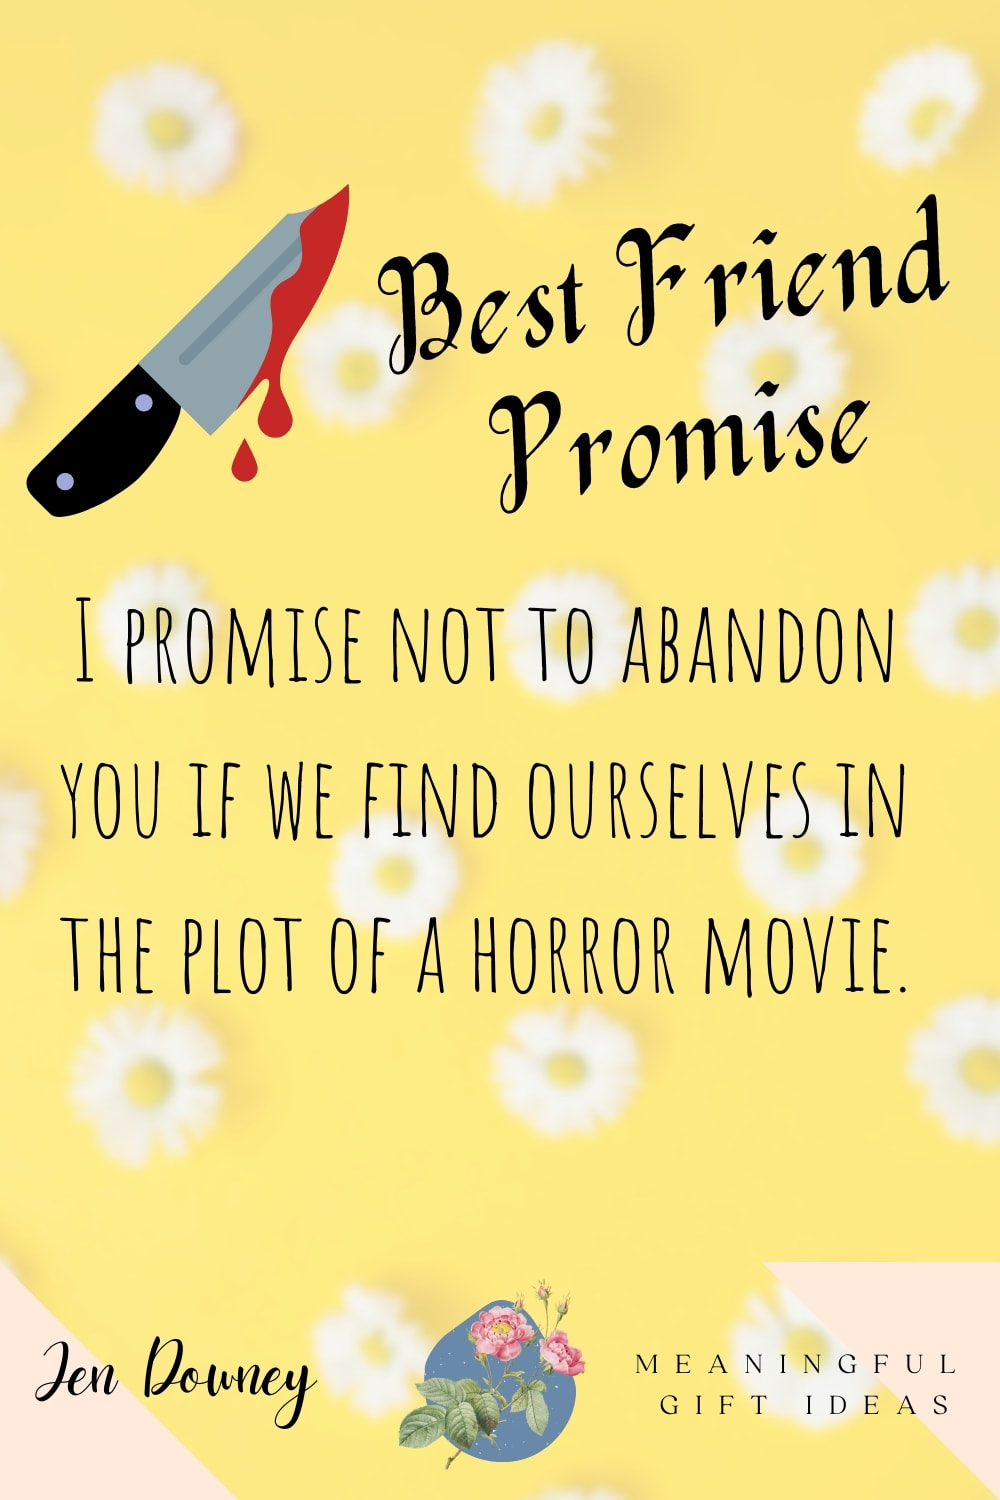 promise not to abandon you in a horror movie